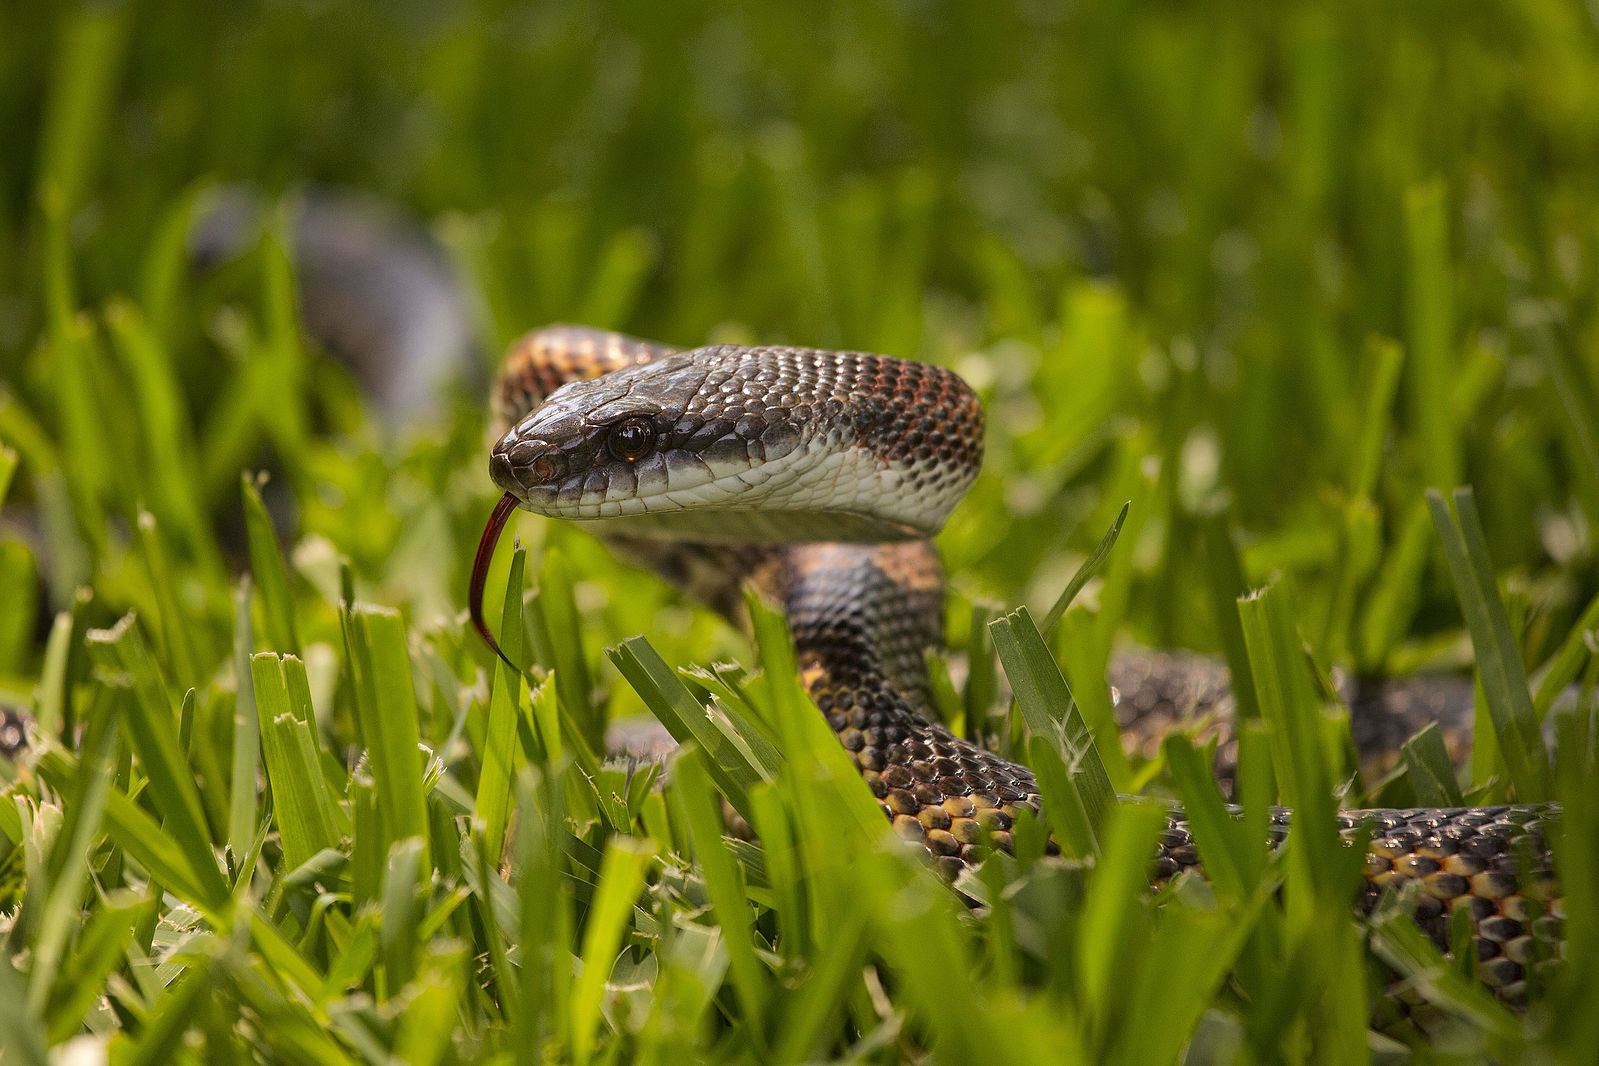 When Do Snakes Come Out In Texas?